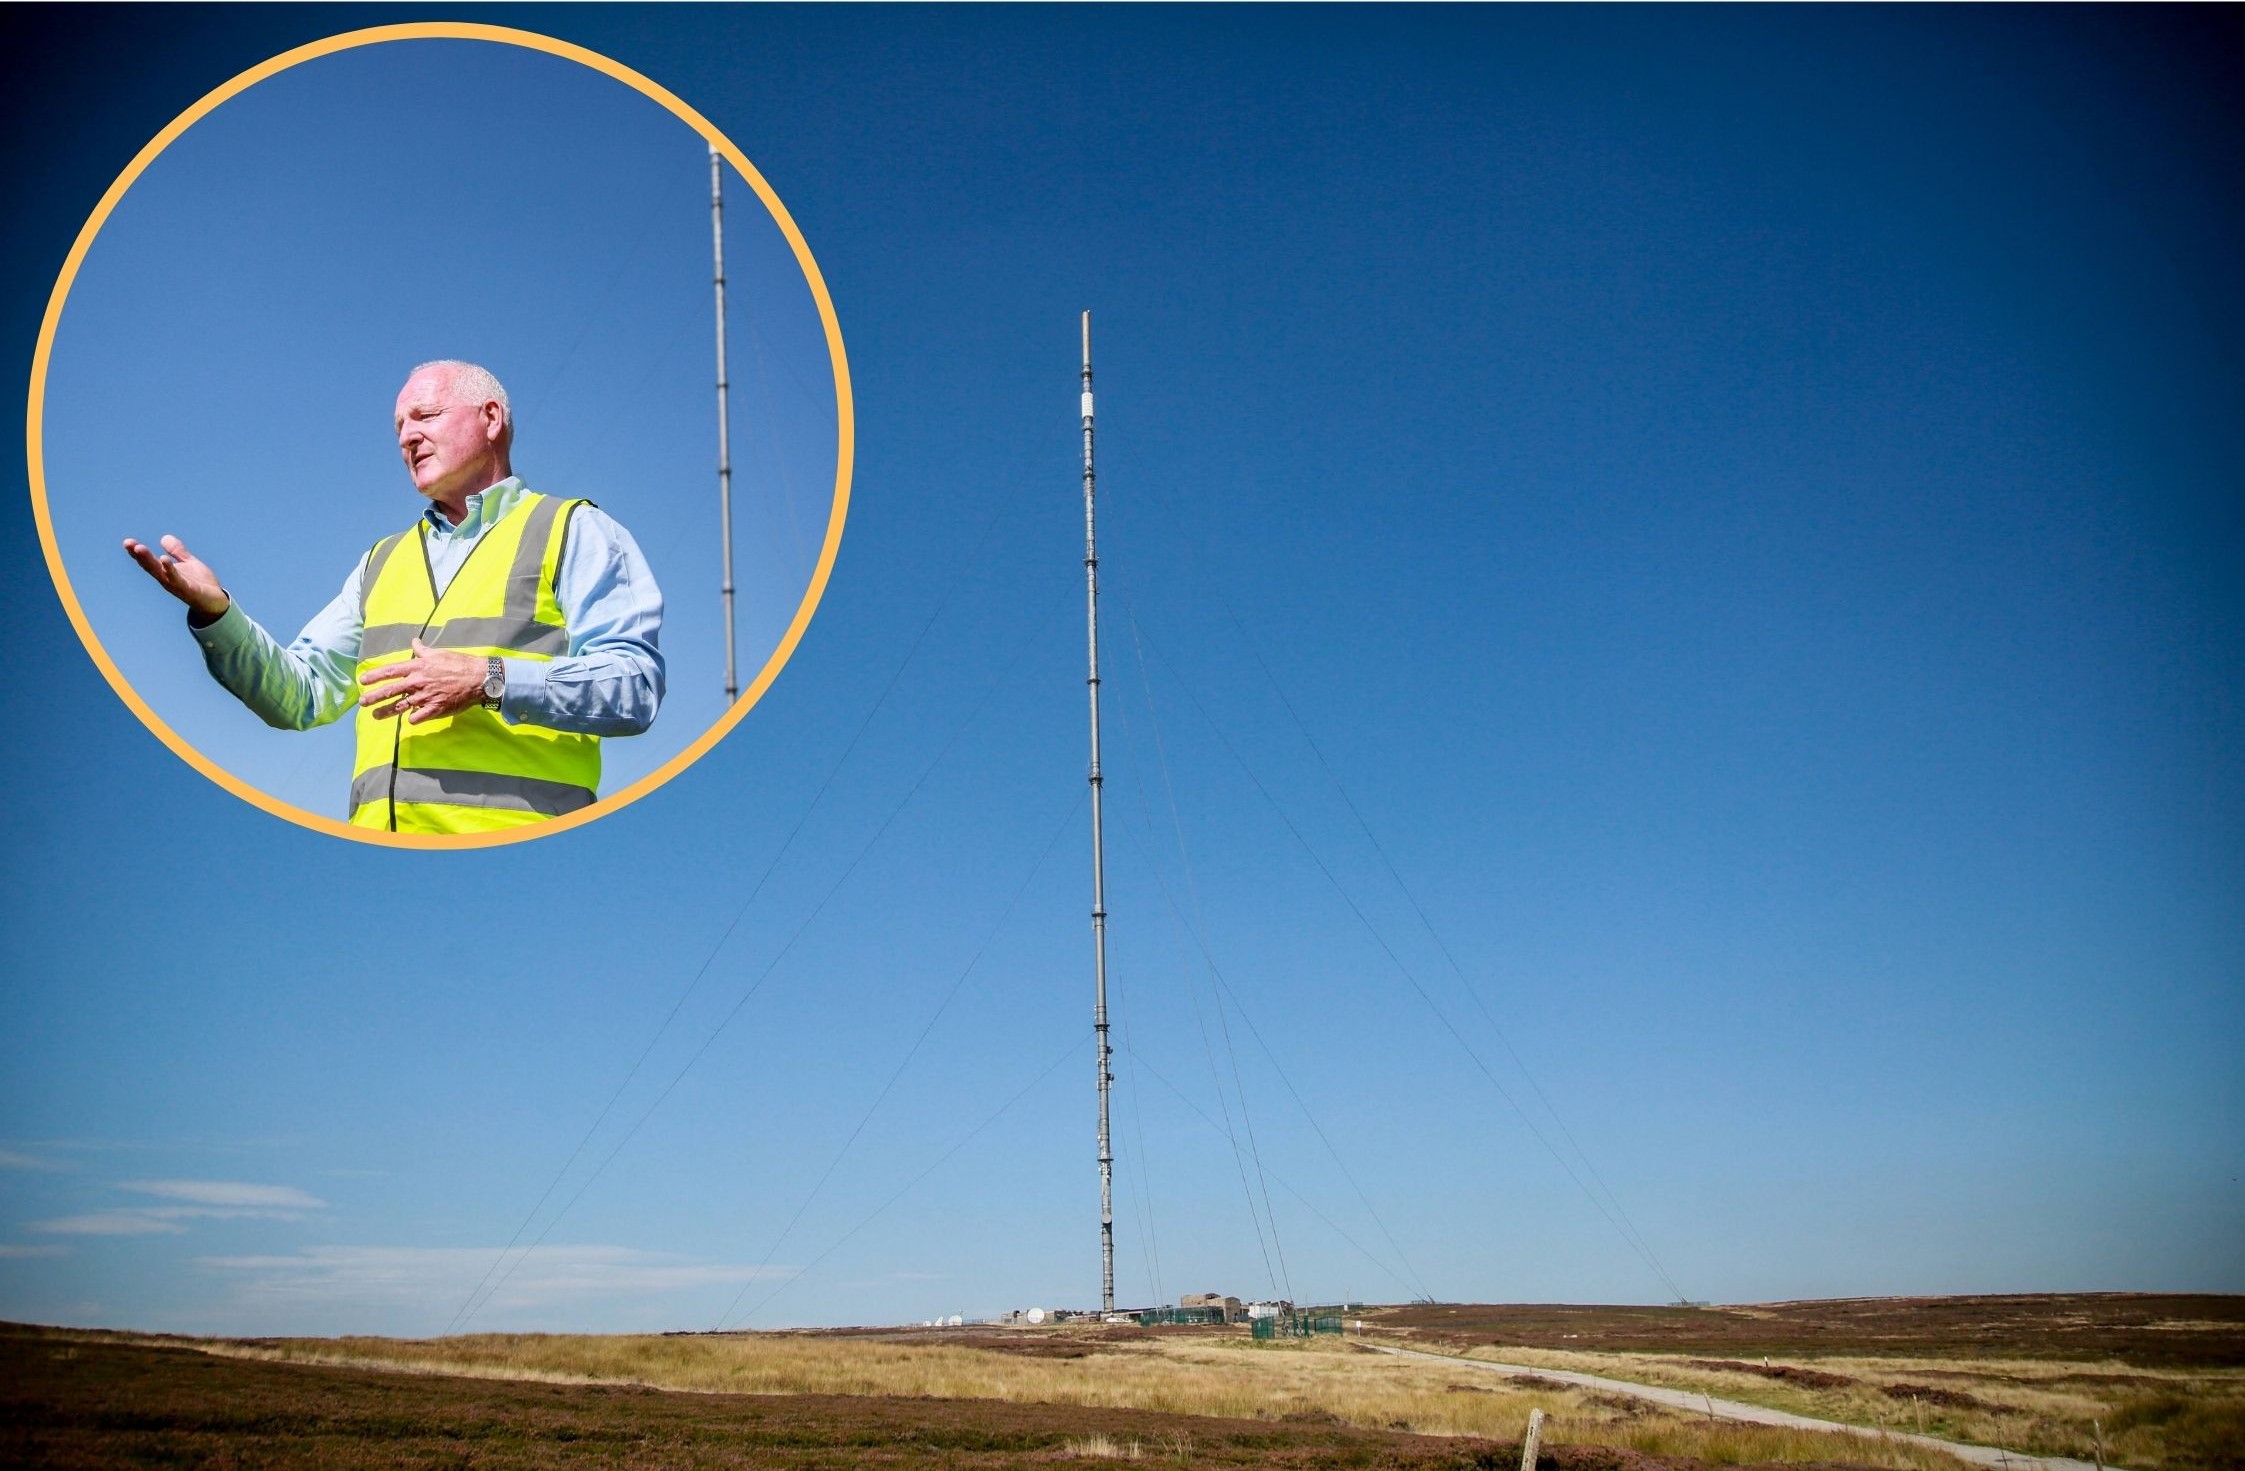 Bilsdale transmitter: Arqiva say they have made checks on other masts in the UK